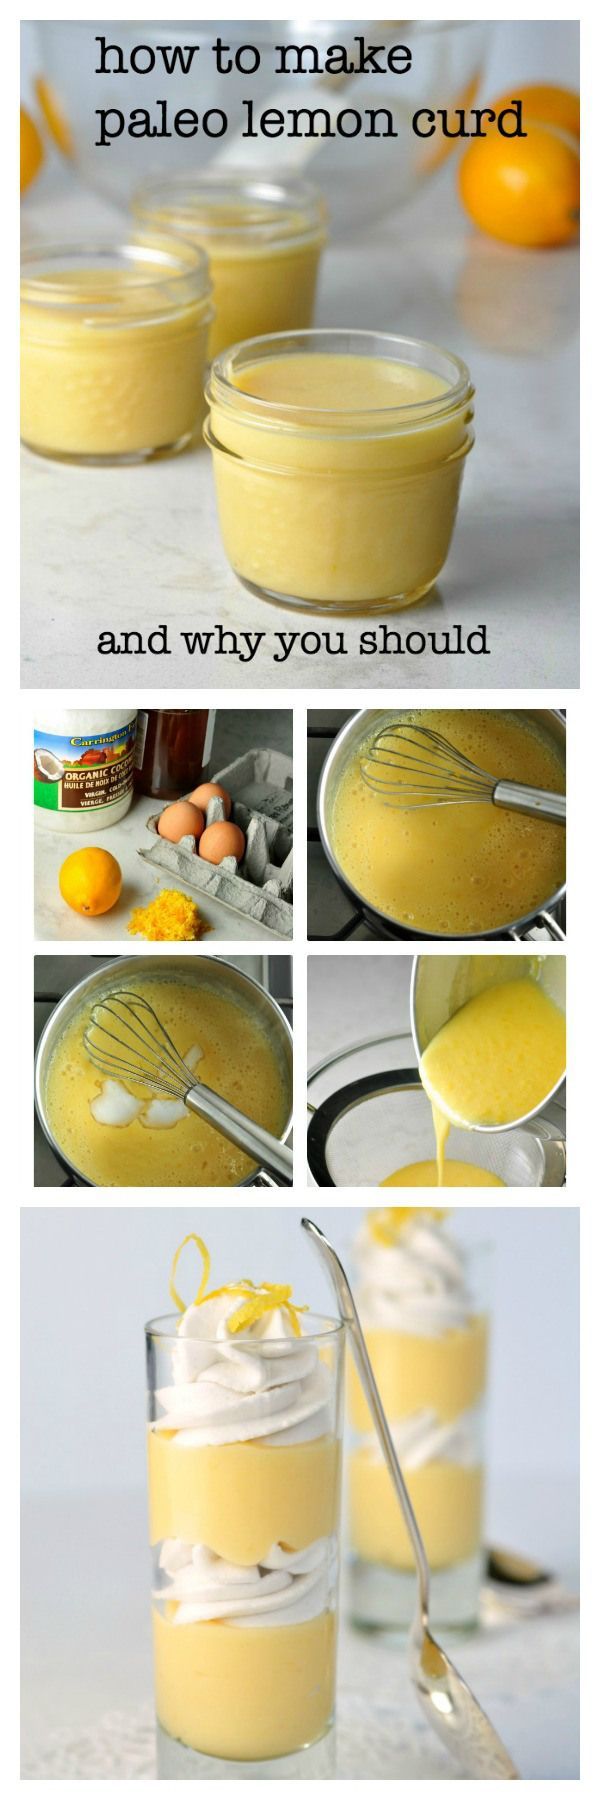 How to make Paleo Lemon Curd, and why you should! A simple 4-step recipe to make your own lemon curd. From Flavour and Savour